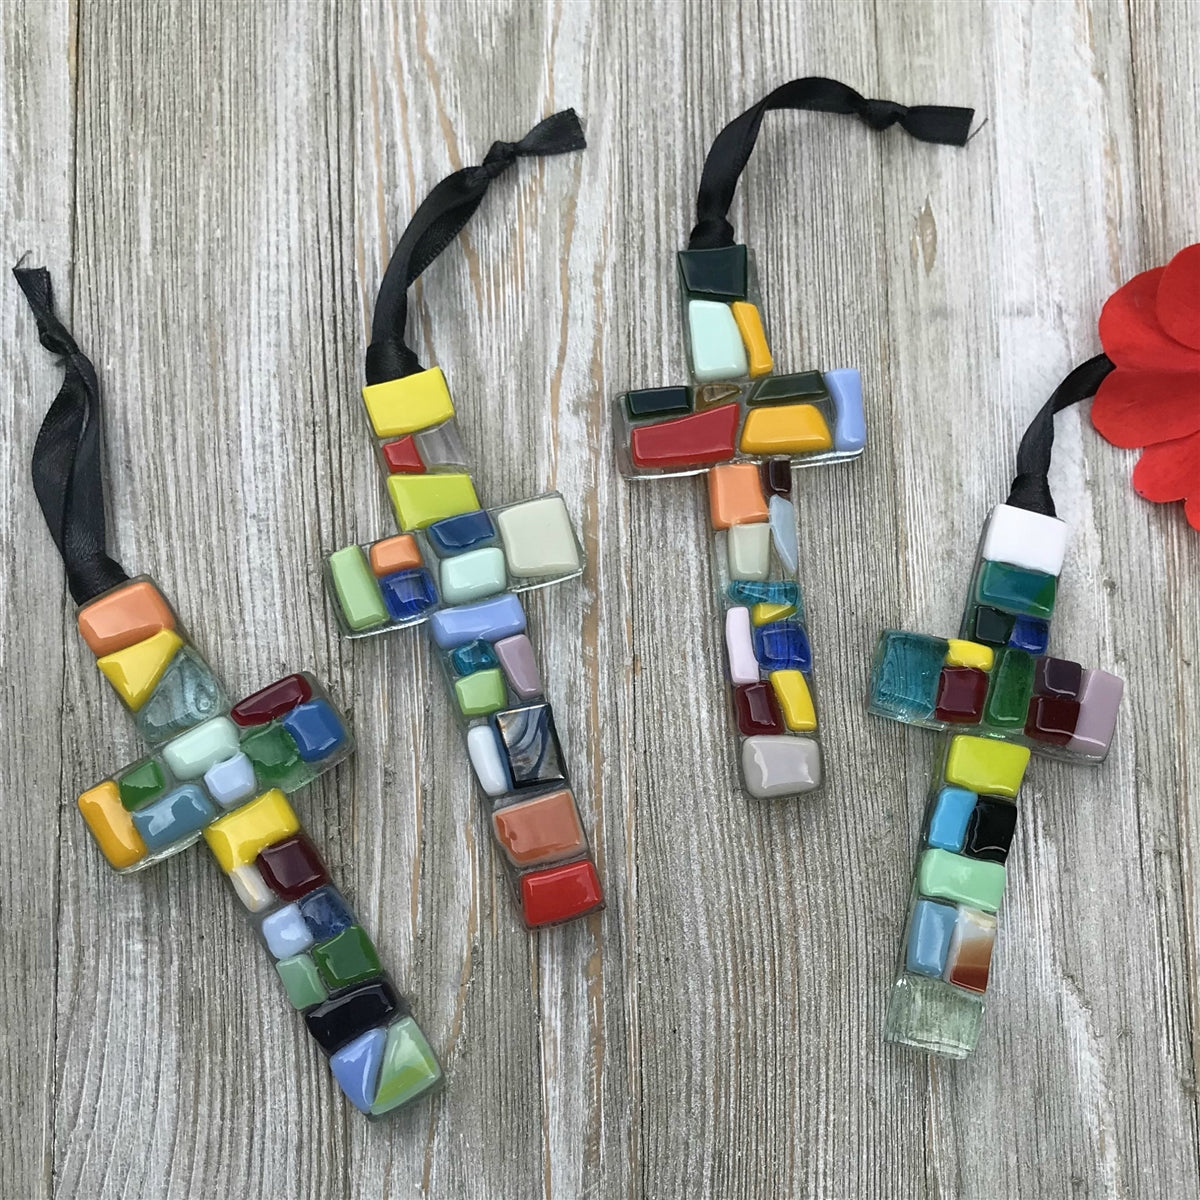 An assortment of multi-colored glass mosaic ornaments.